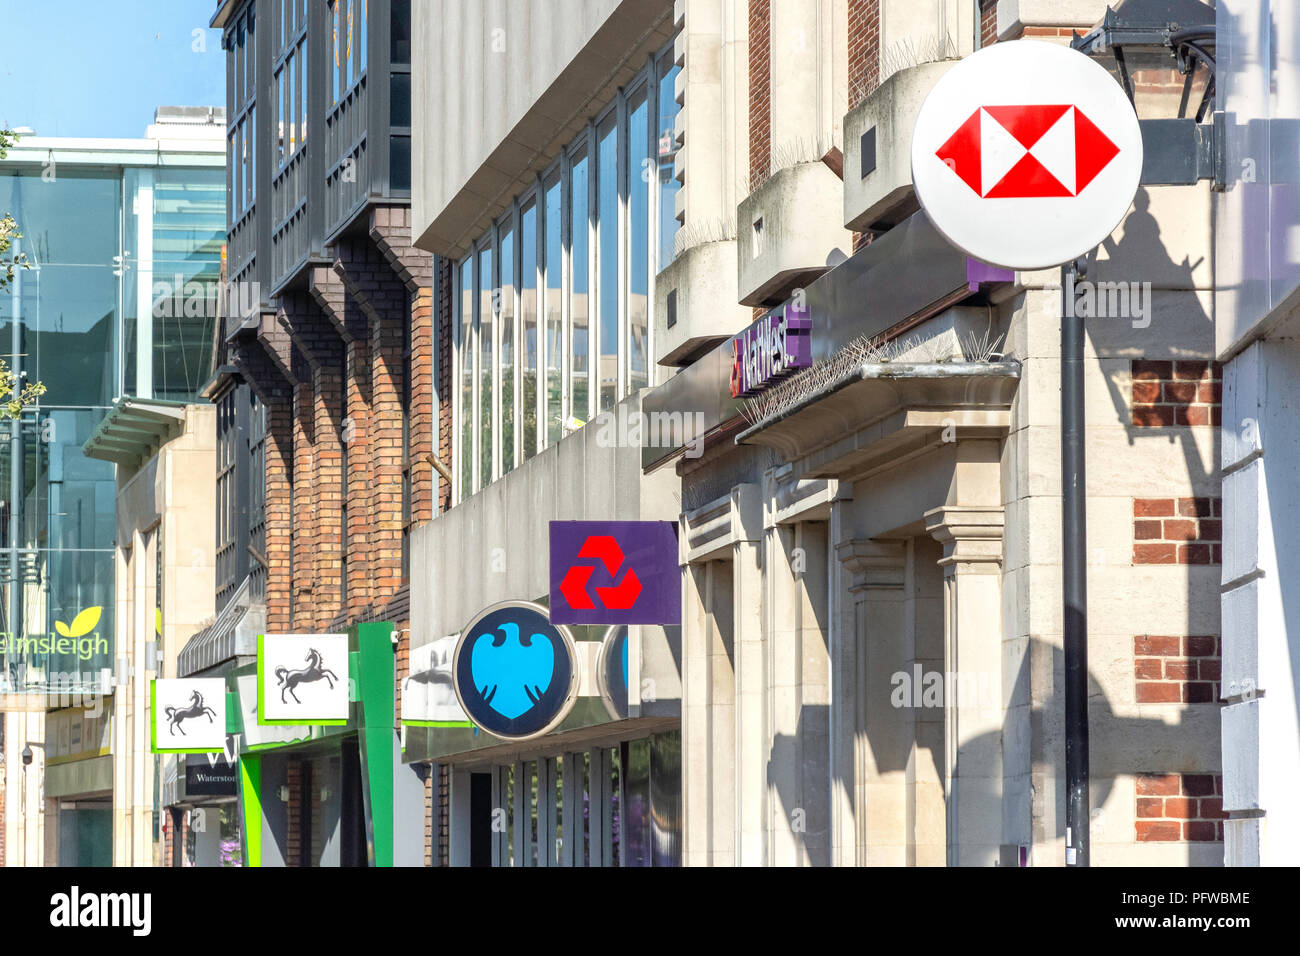 Row of high street banks (Lloyds, Barclays, Nat West & HSBC), High Street, Staines-upon-Thames, Surrey, England, United Kingdom Stock Photo